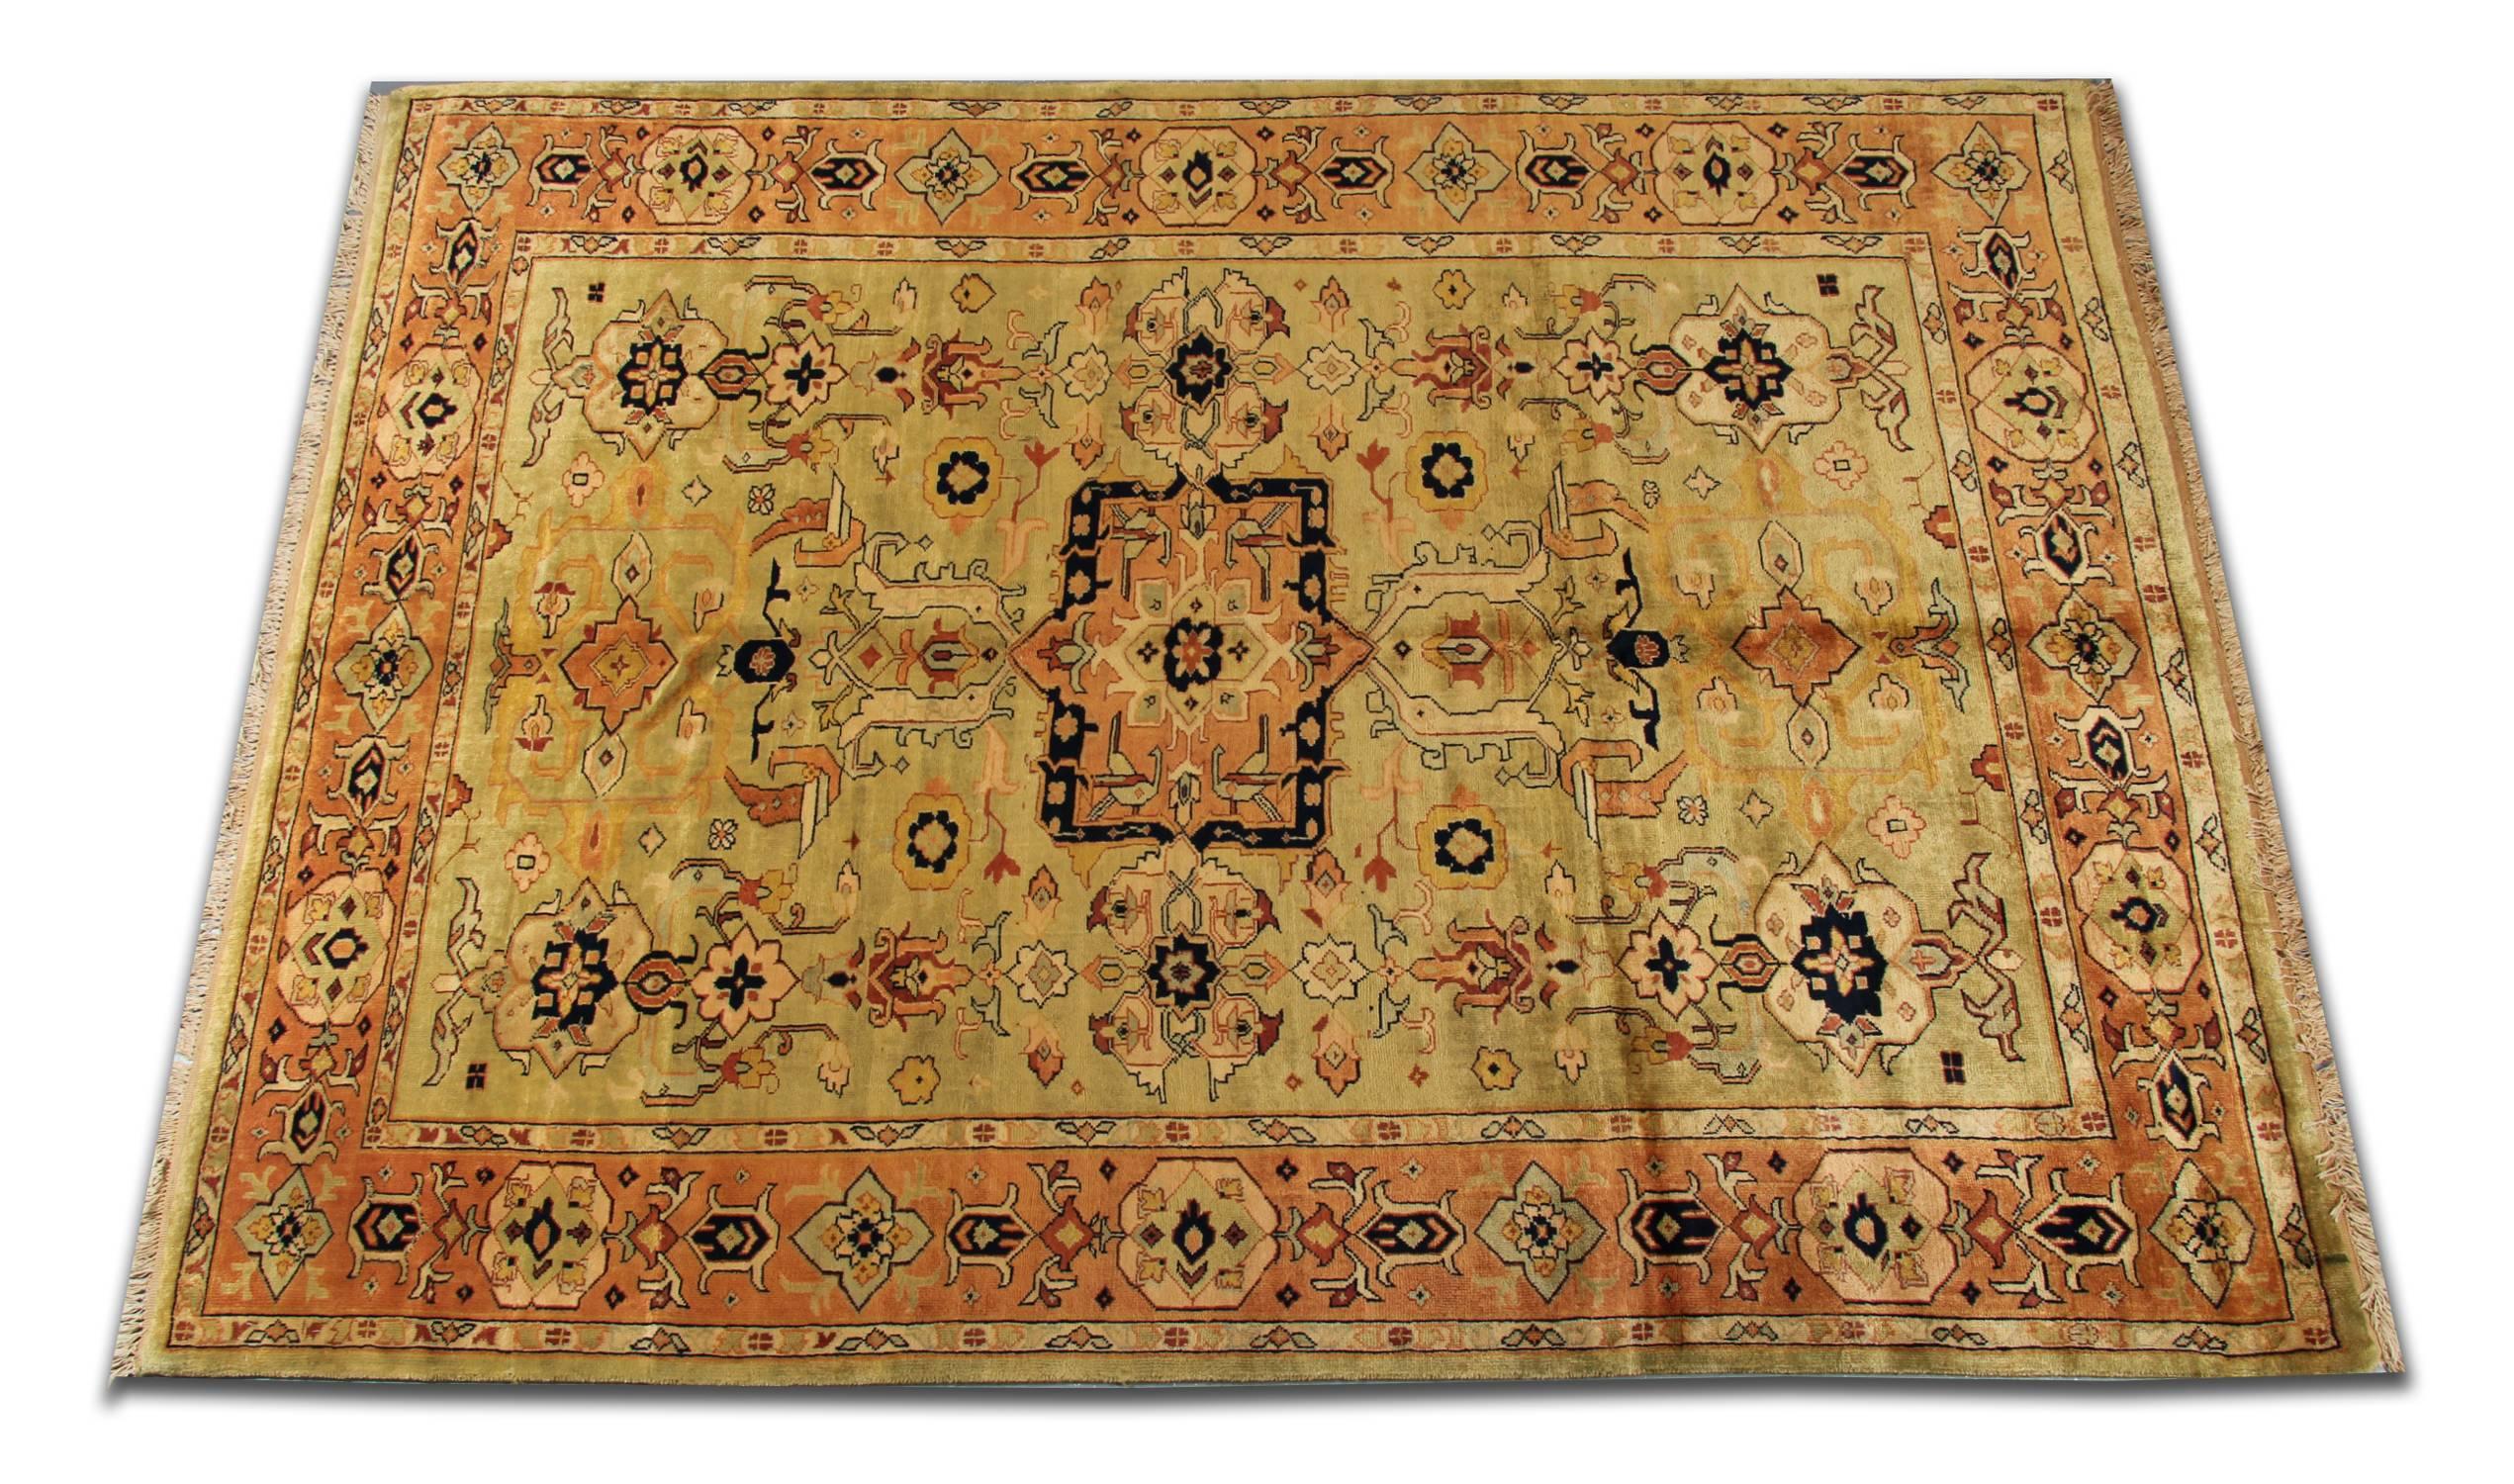 This grand wool rug has been woven by hand and features a symmetrical floral motif and medallion design. Made with a creamy beige background with accents of brown, rust and black accents that make up the intricate design.
Suitable for both modern